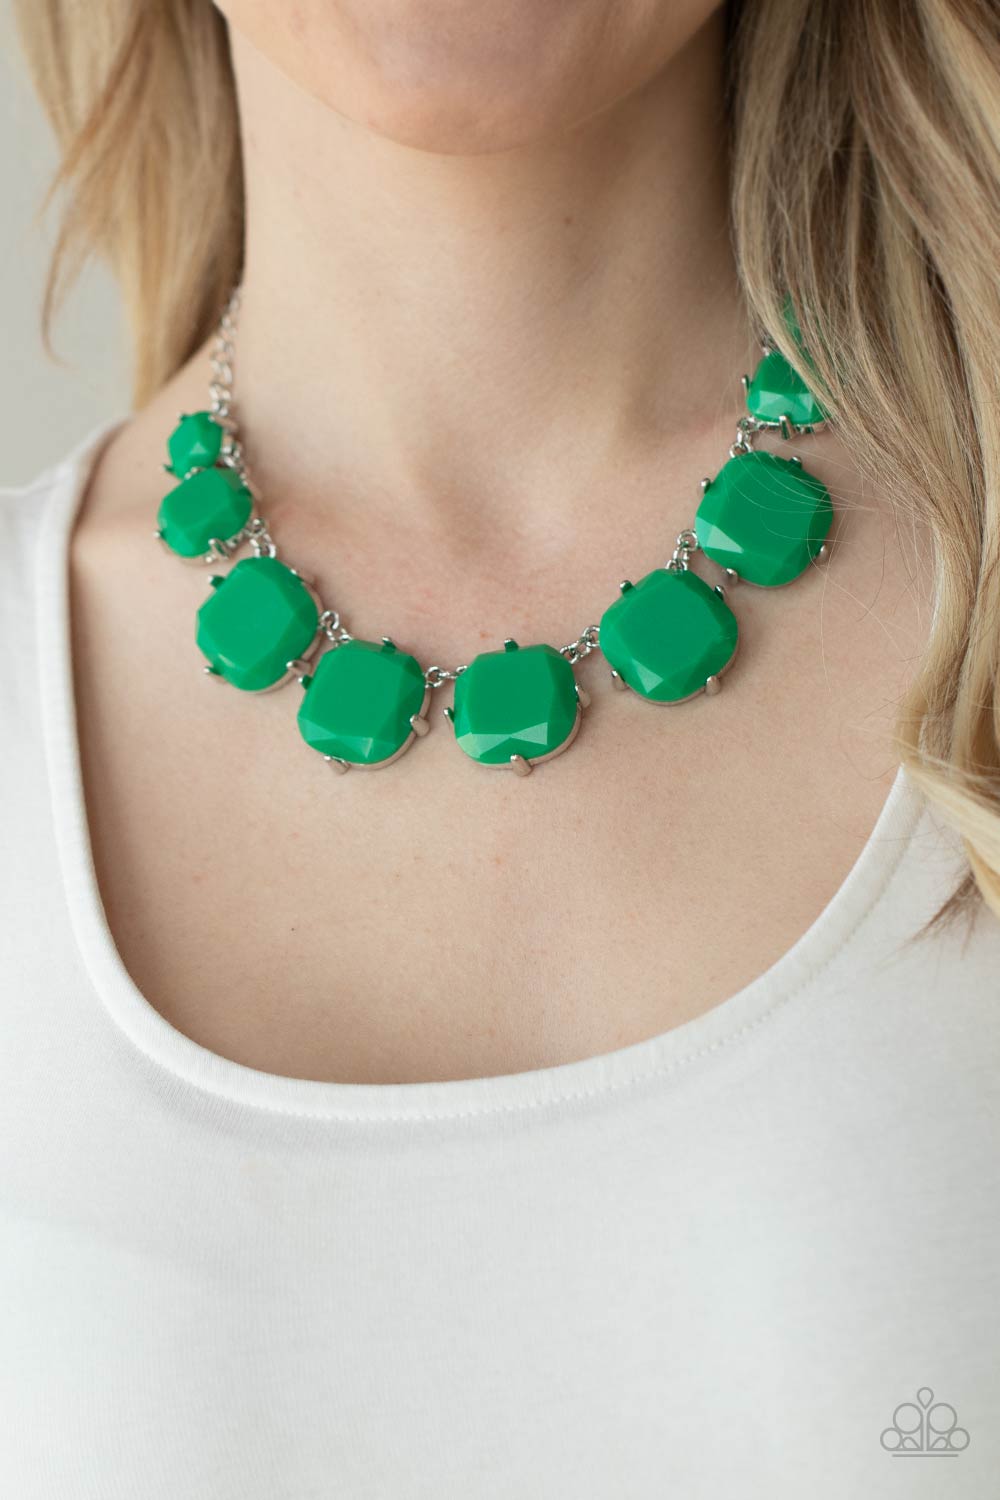 PRE-ORDER - Paparazzi Prismatic Prima Donna - Green - Necklace & Earrings - $5 Jewelry with Ashley Swint